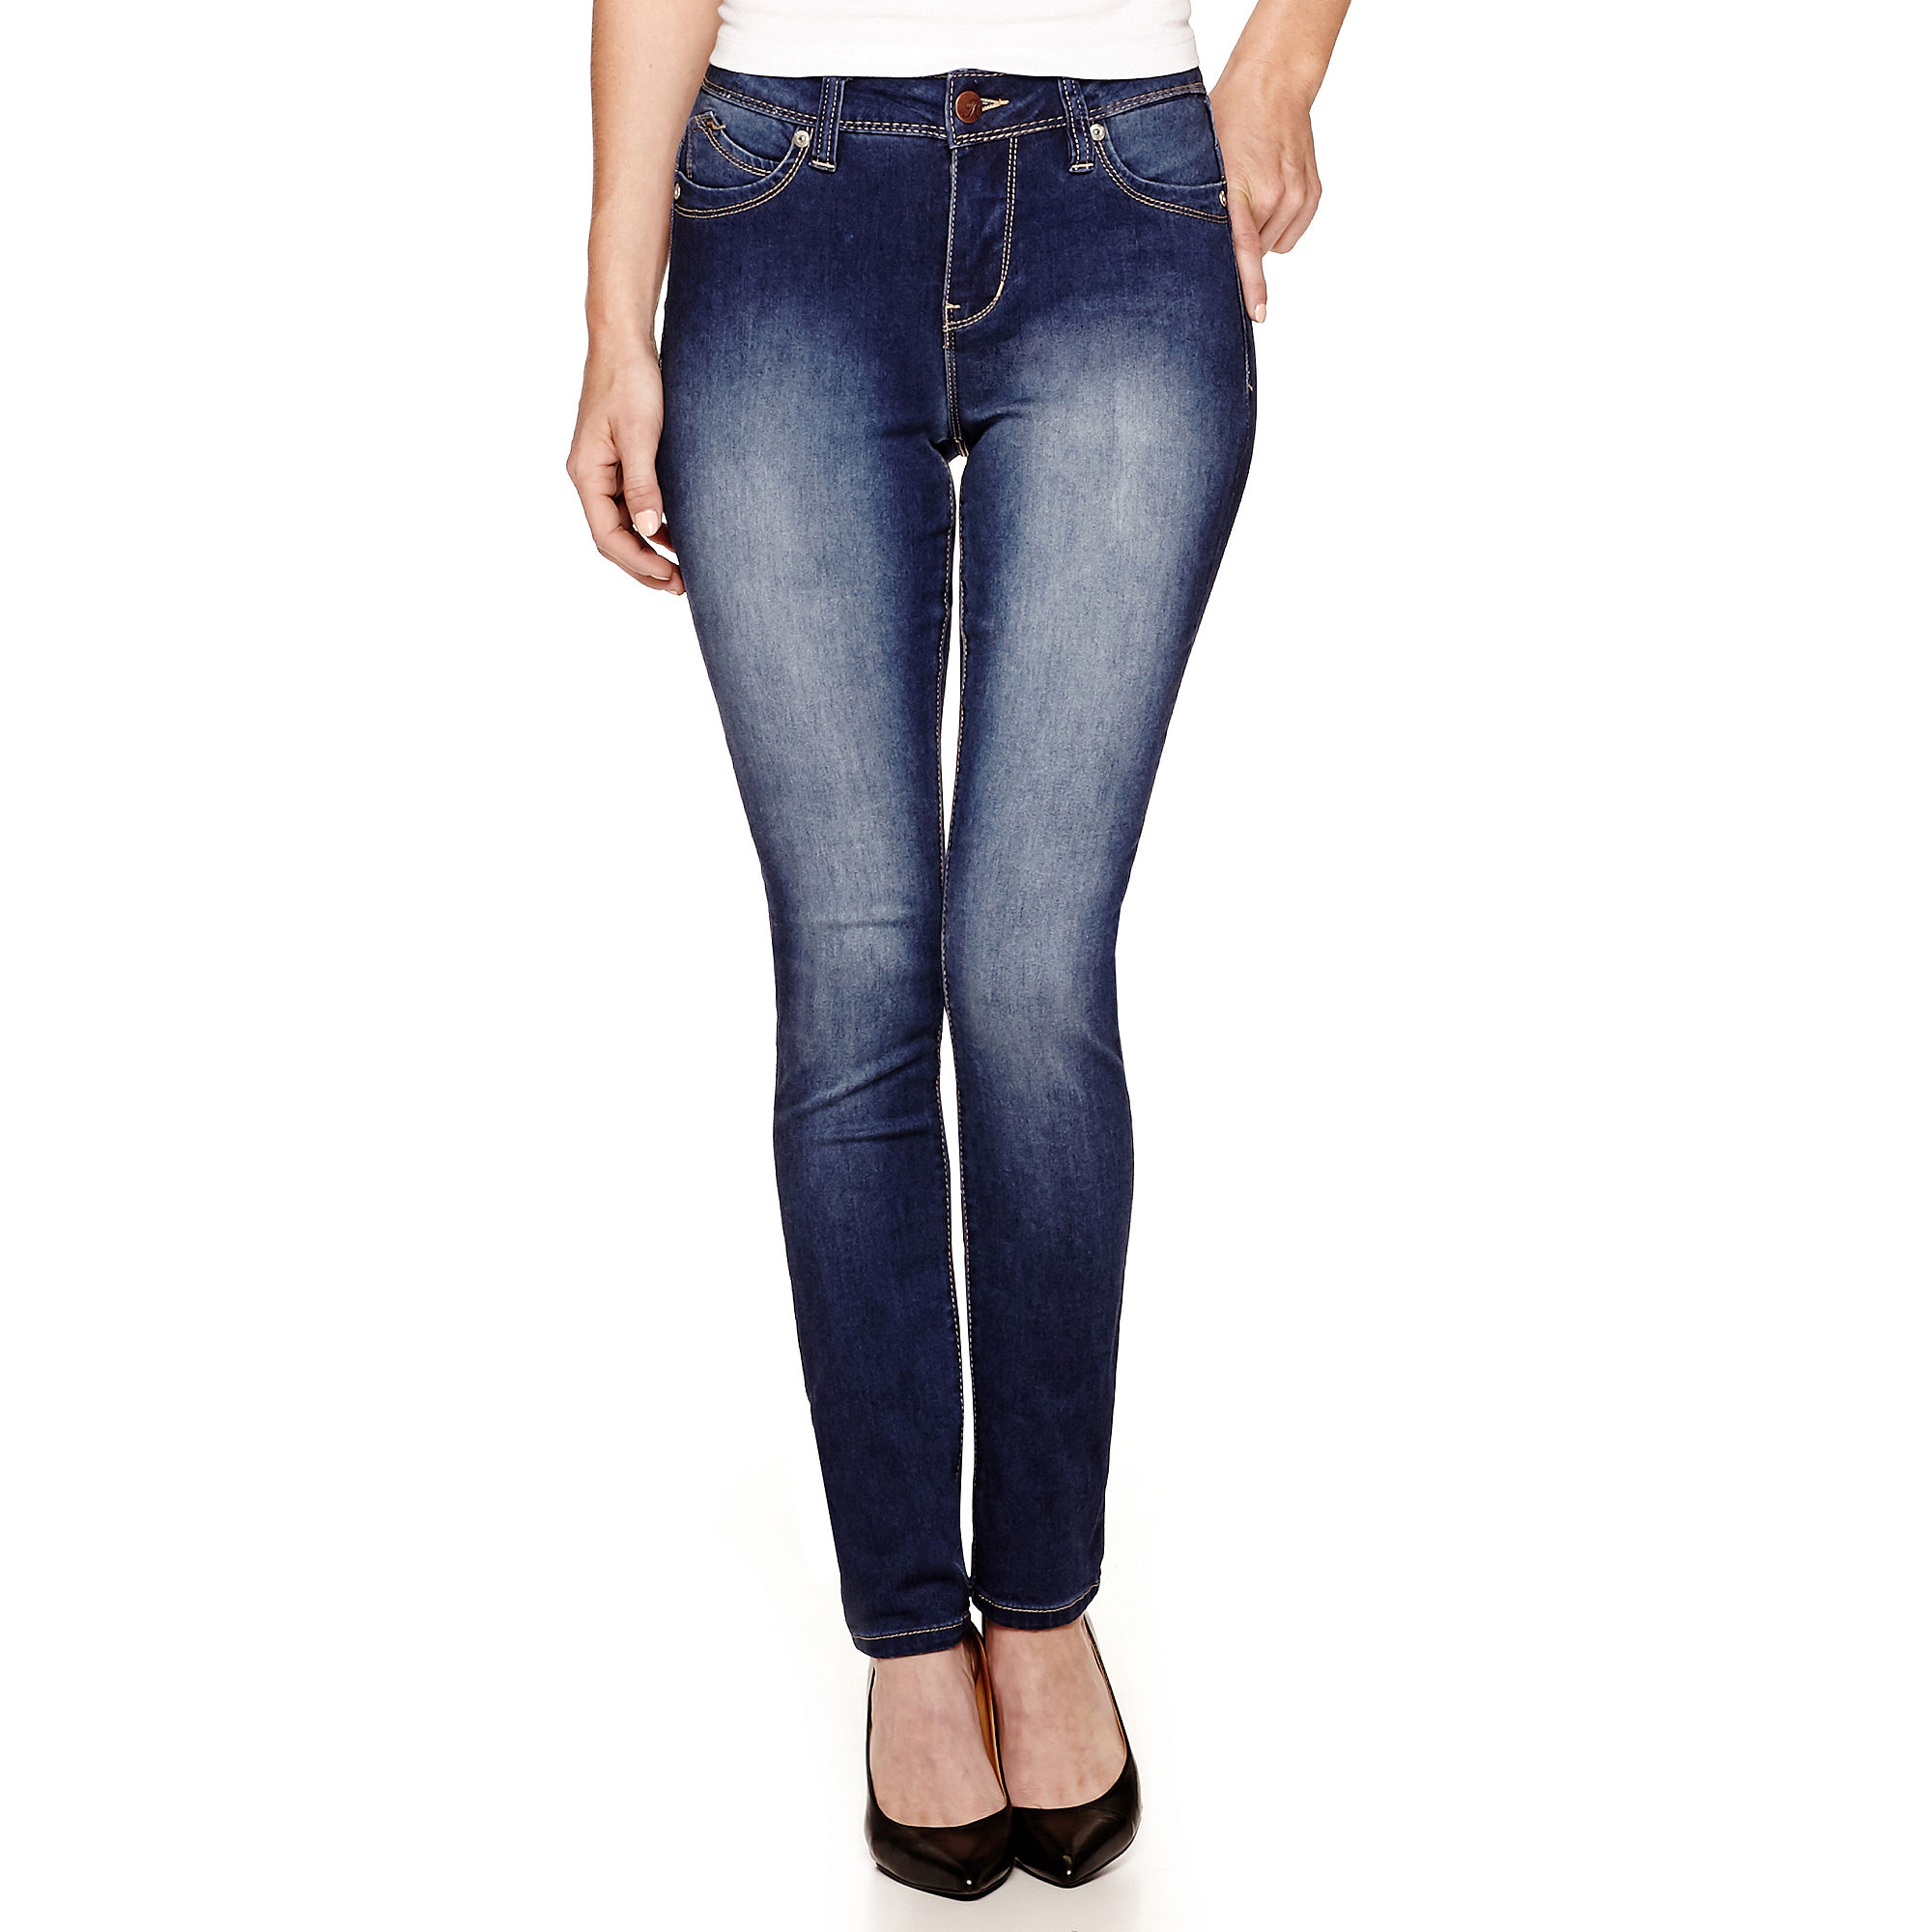 Jeans for Small or Flat Butts | Jeans Hub